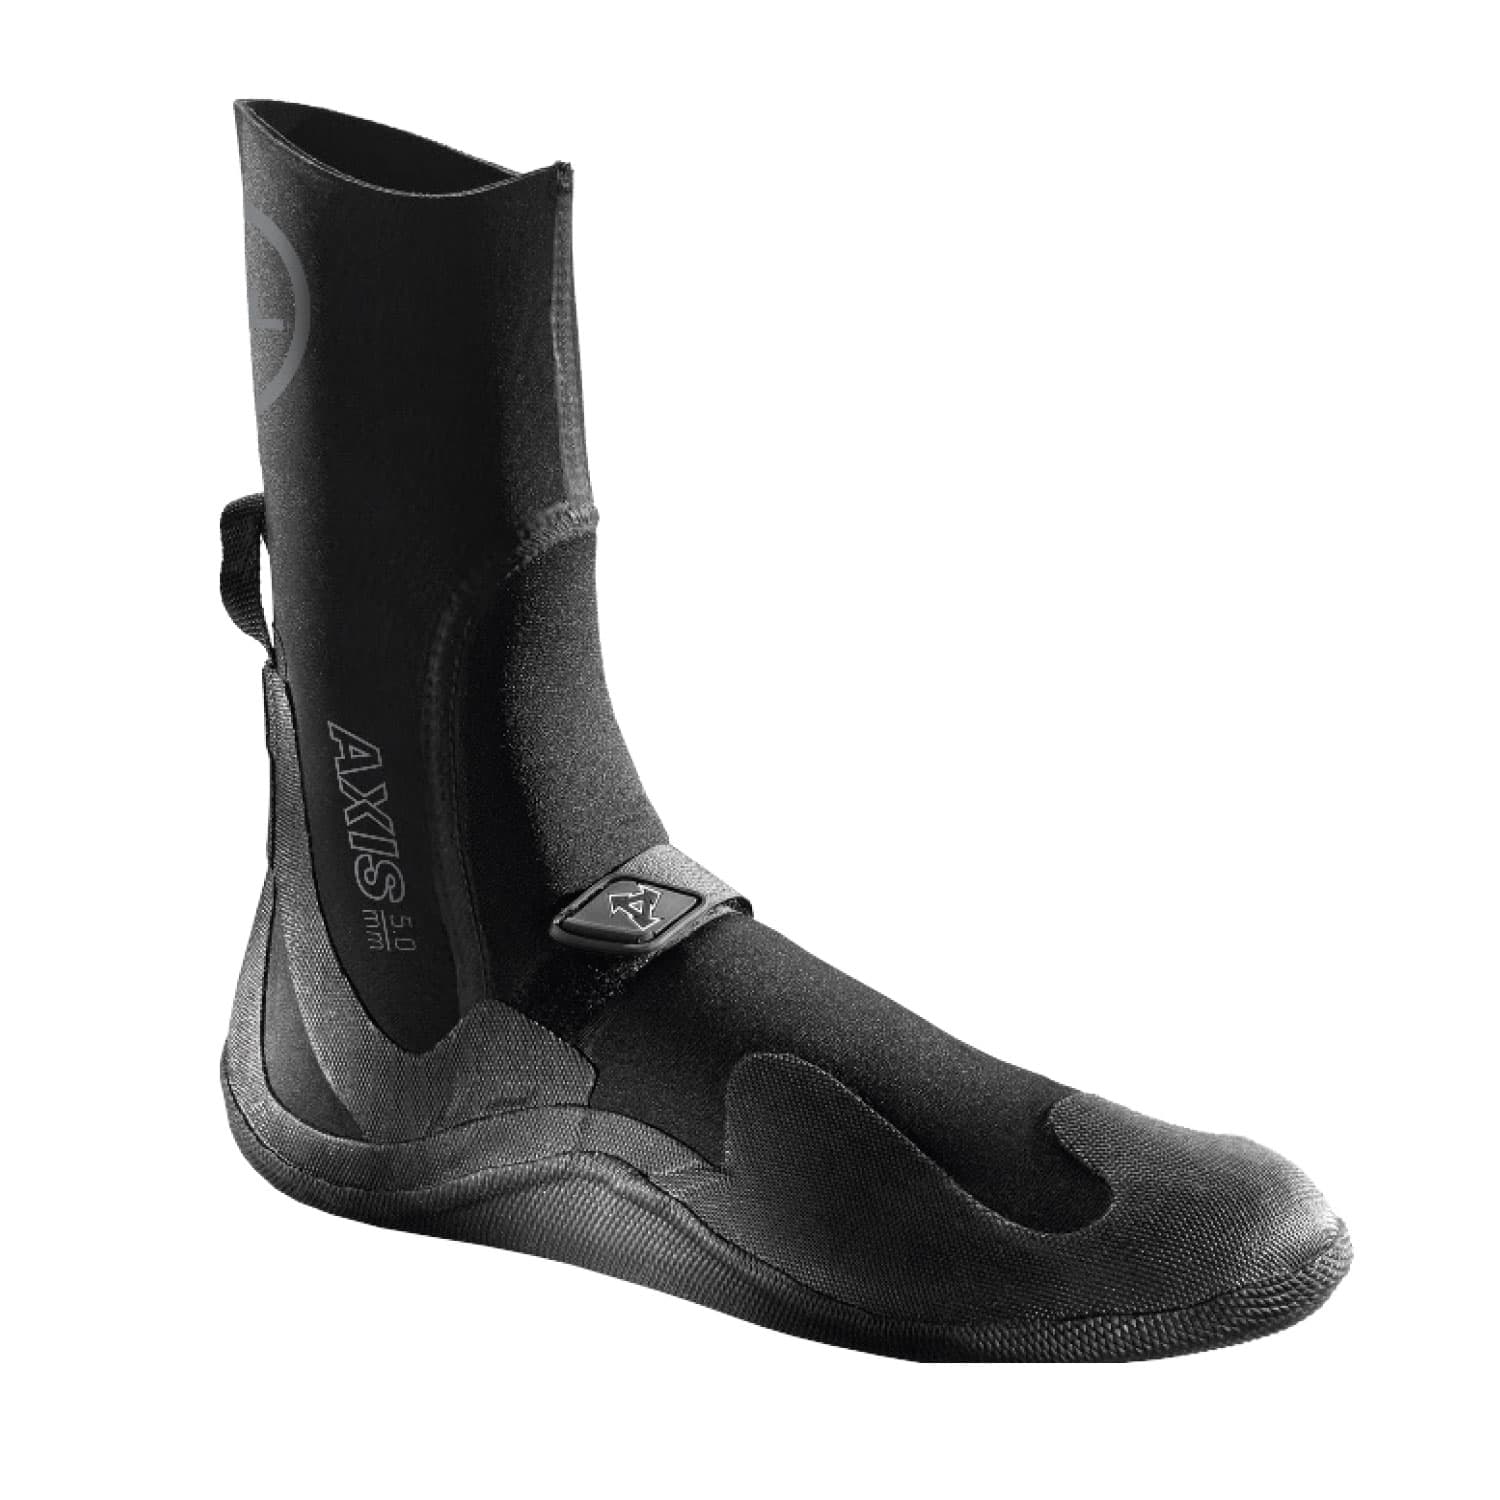 Axis-Round-Toe-Wetsuit-Boots